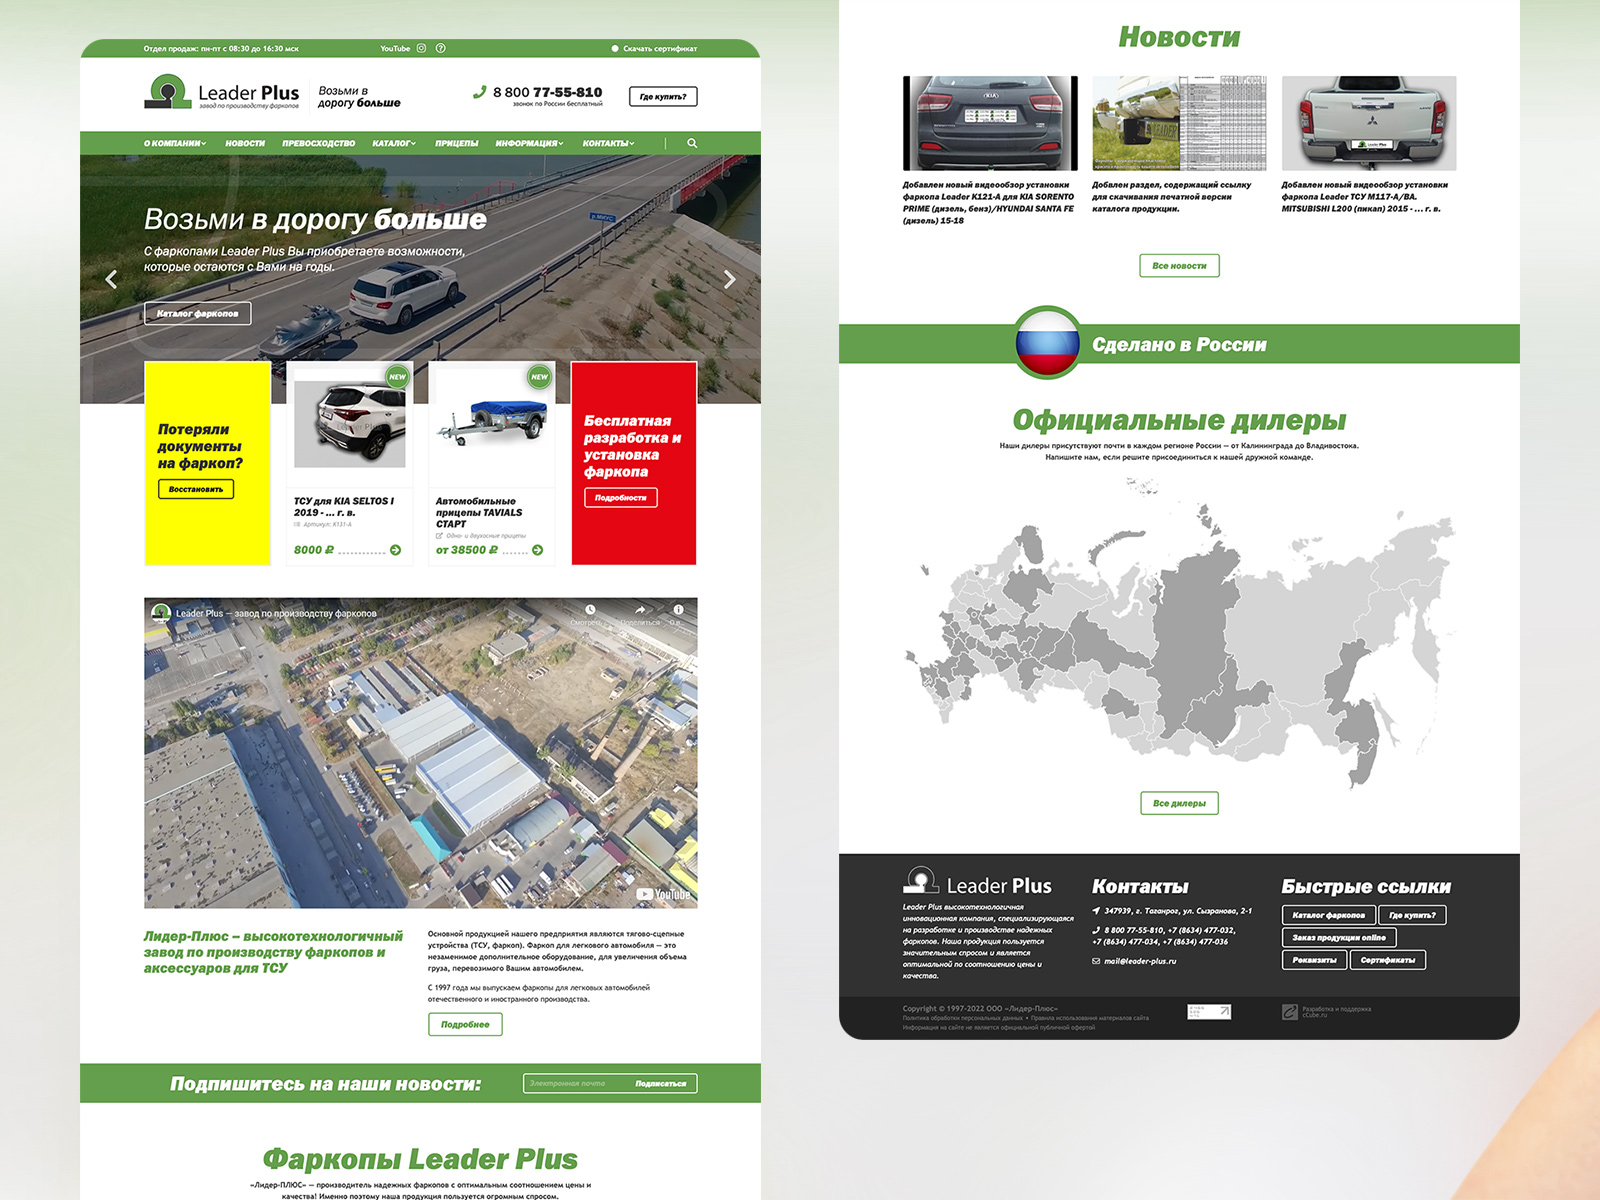 The second version of the Leader Plus towbar factory website